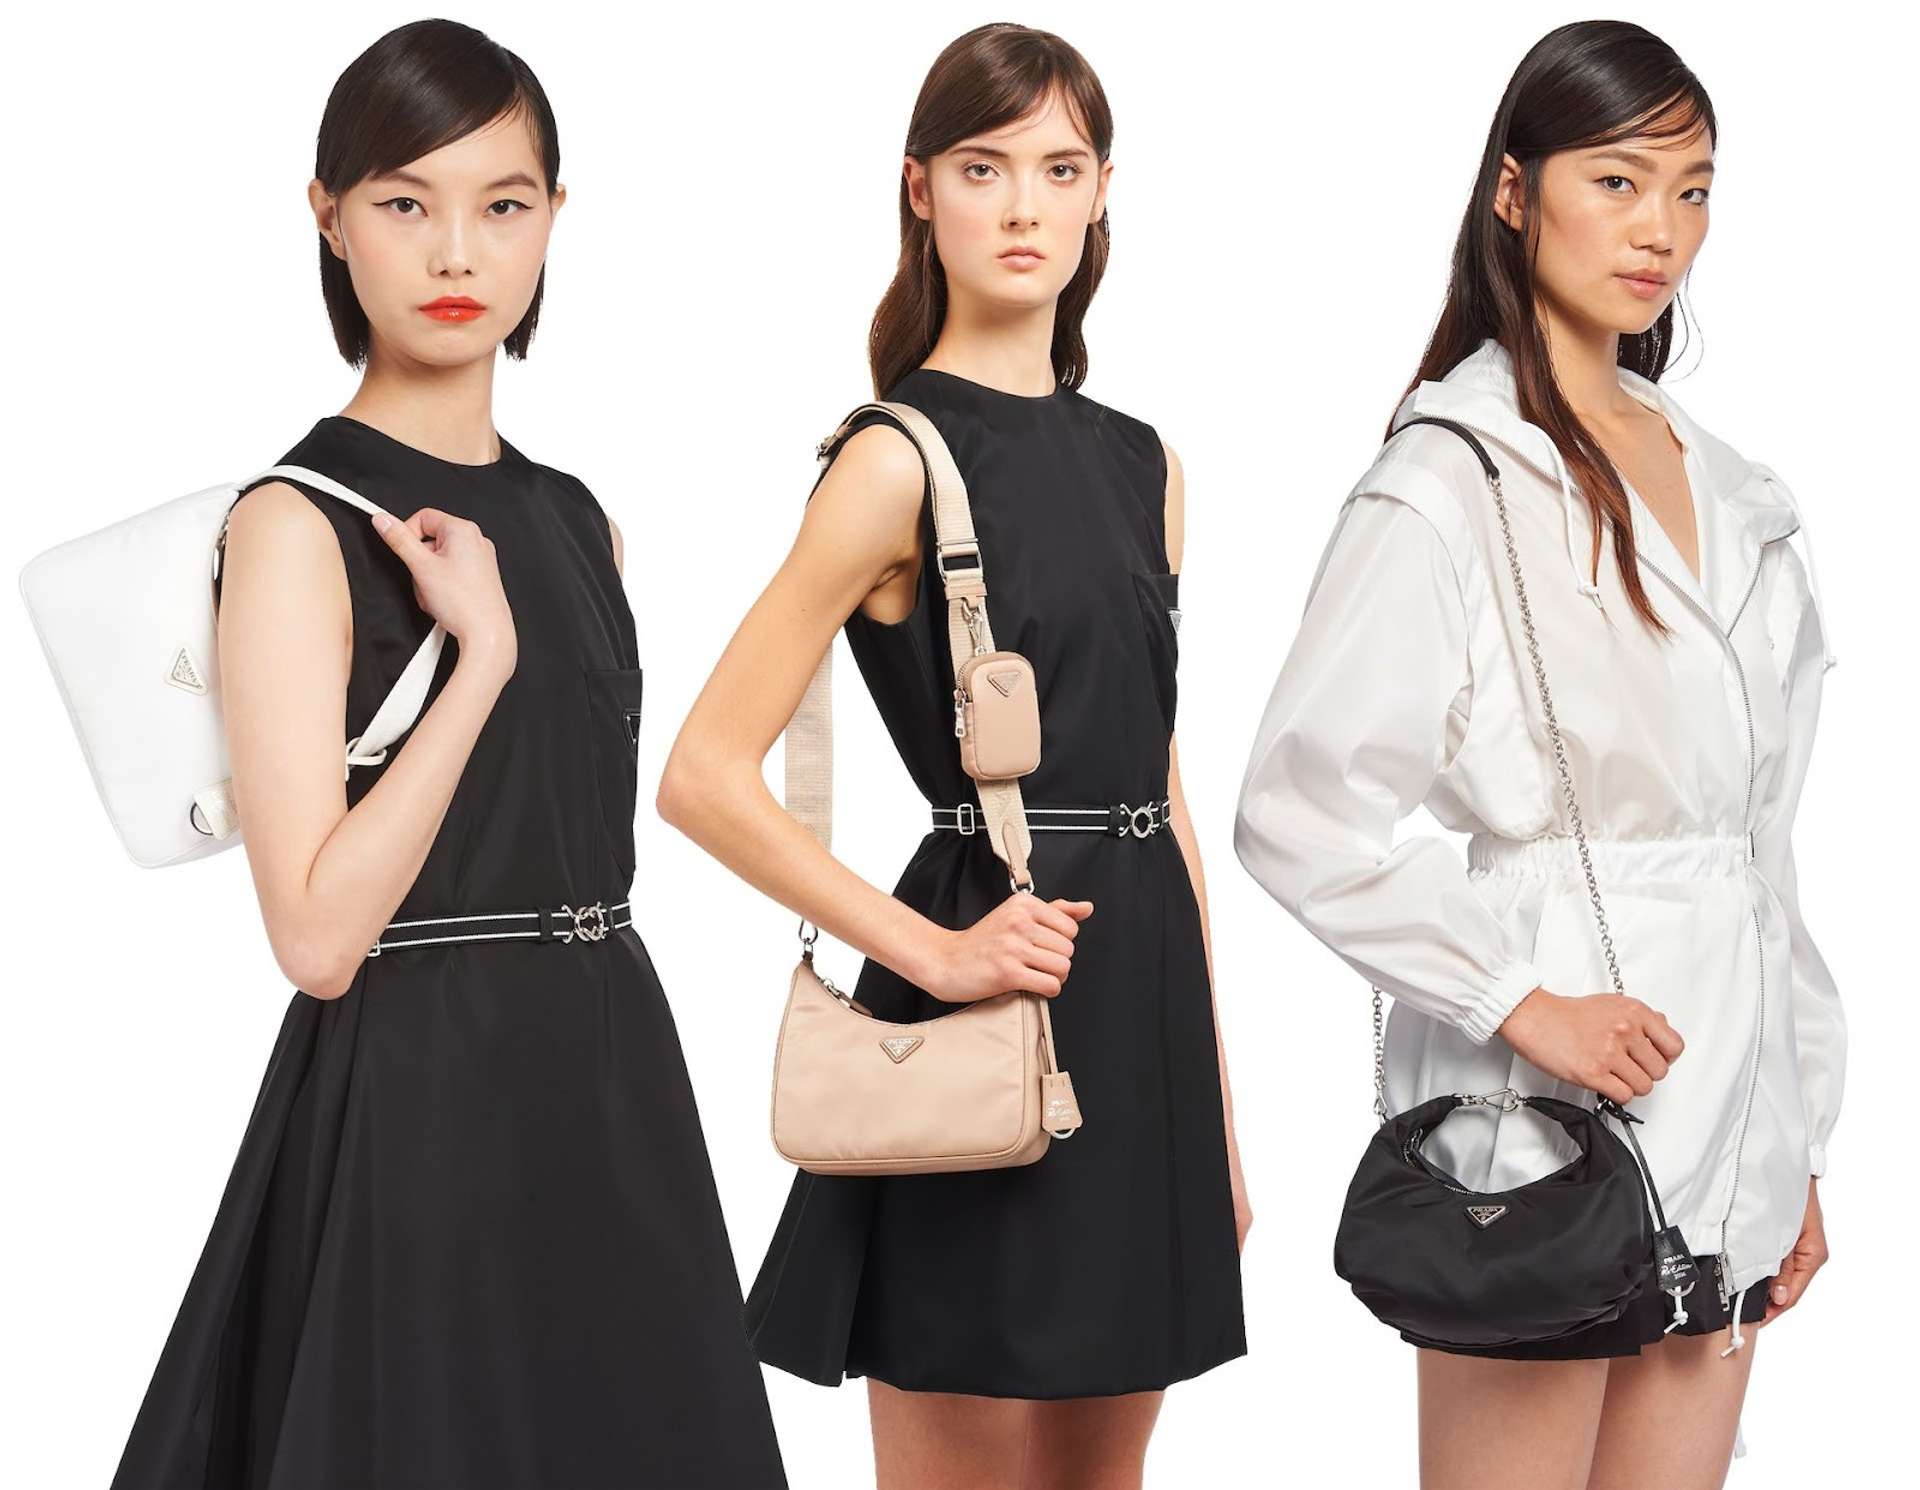 An image of three models, all dressed in black and white, carrying three different versions of Prada’s Nylon bags.